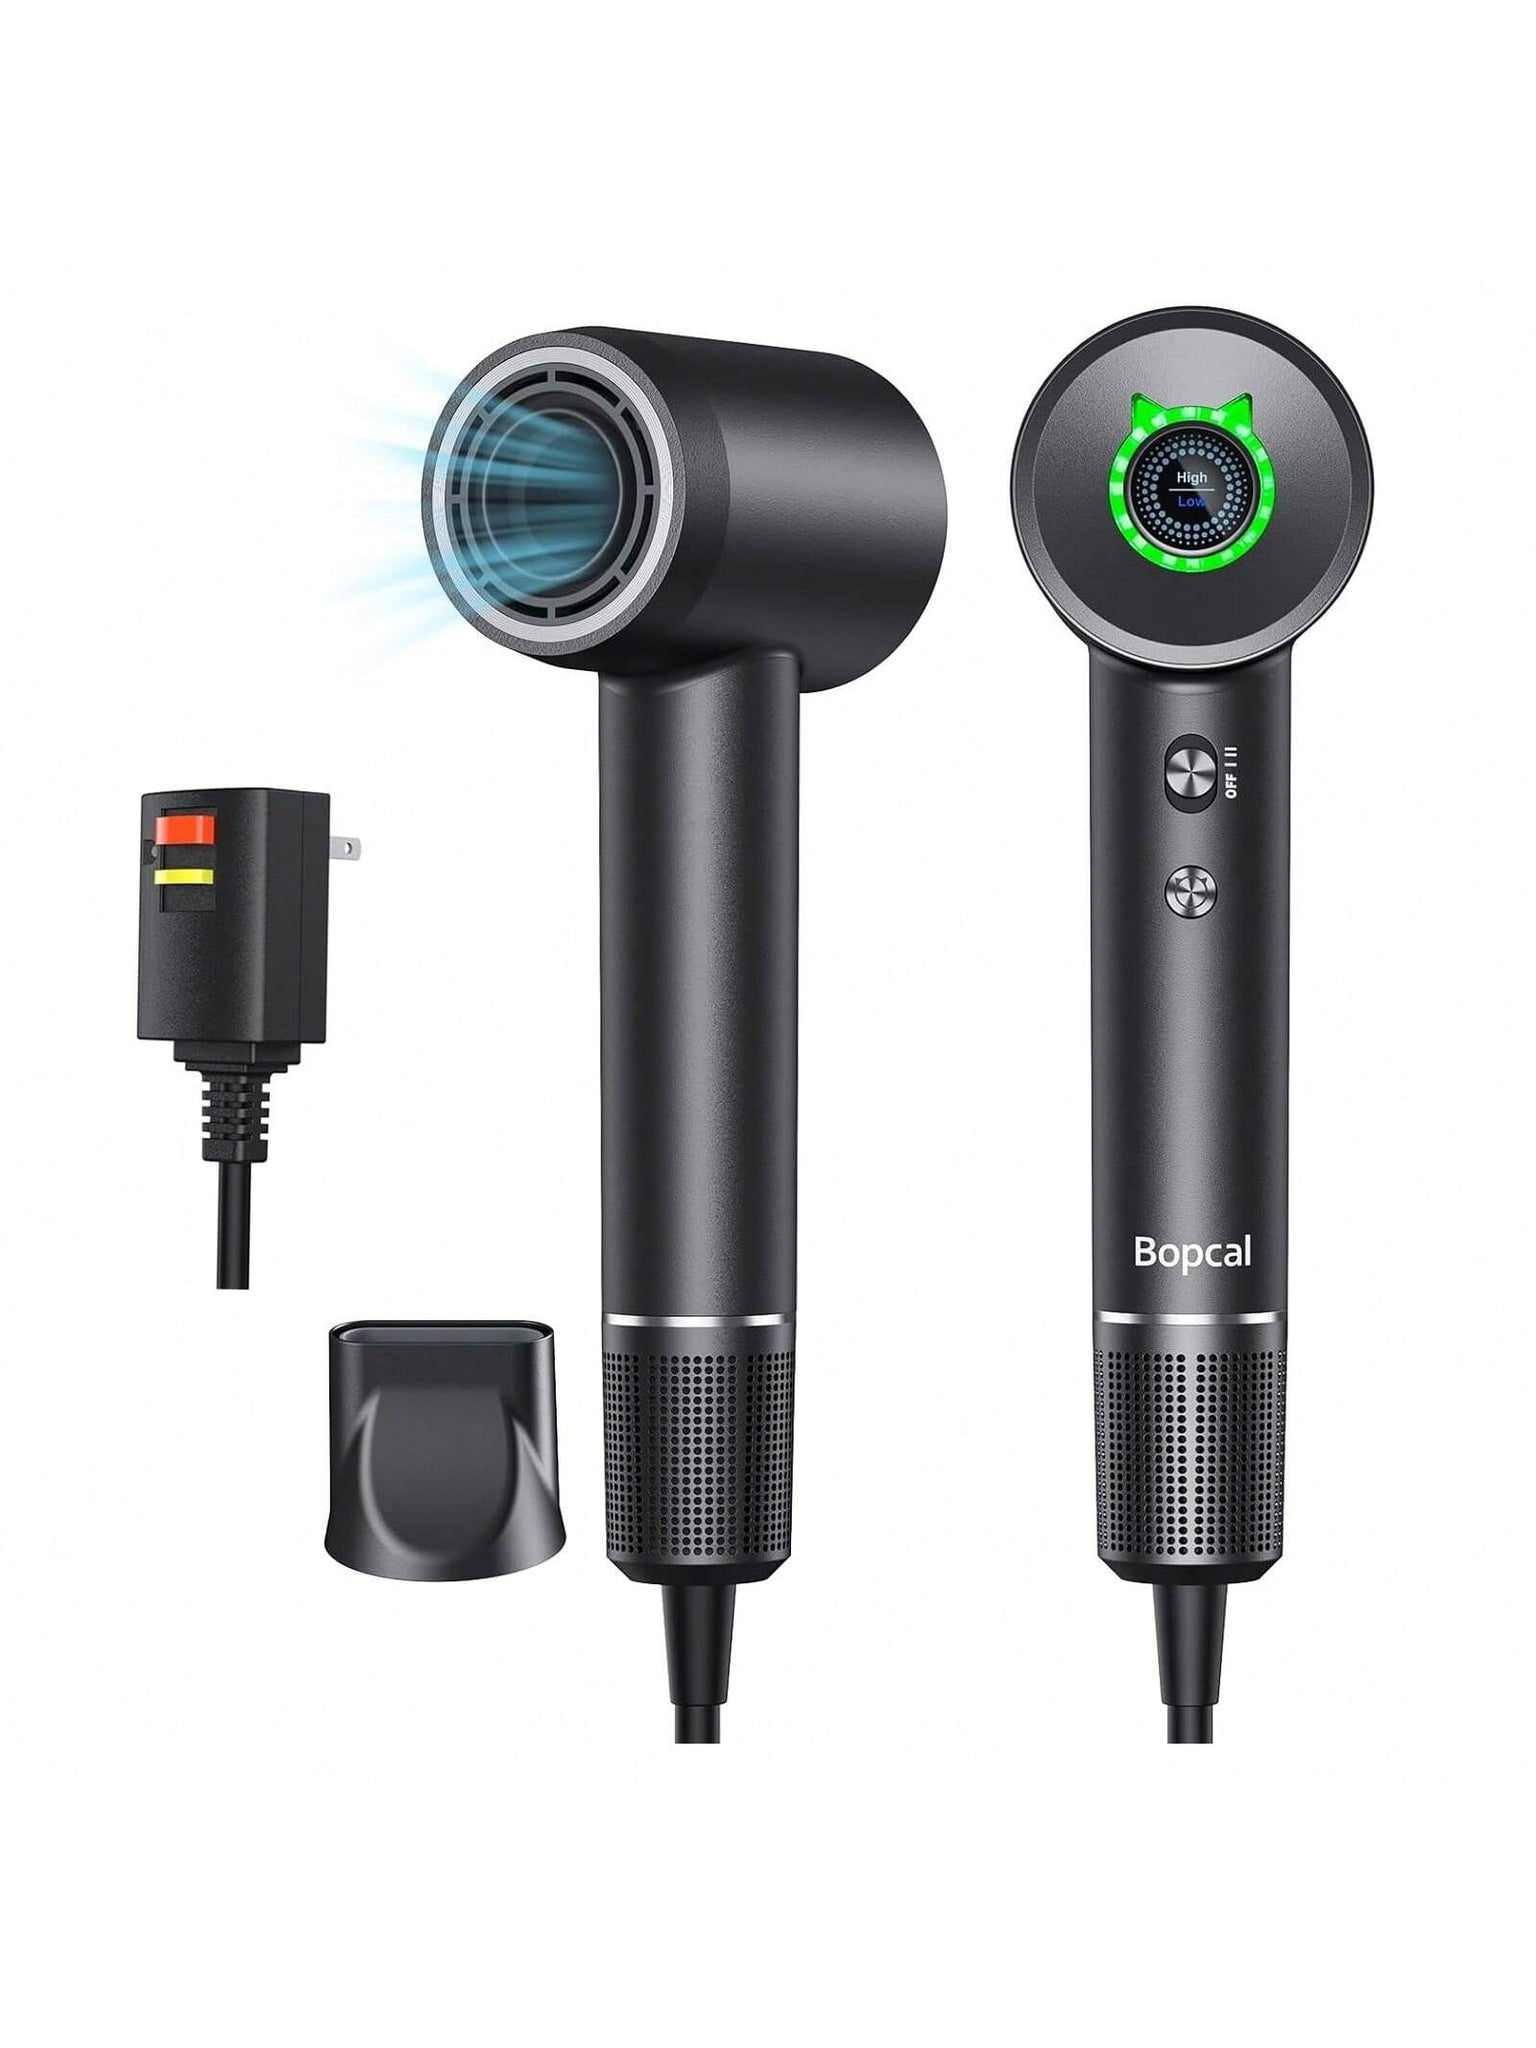 1 Black ALCI Safety Plug-Type Hair Dryer, Using High-Speed Ion Hair Dryer Technology, Quickly Drying Hair, Maintaining Constant Temperature, Intelligent Temperature Control, Professional Quality, With Screen Display, 110,000 RPM High-Speed Brushless--1